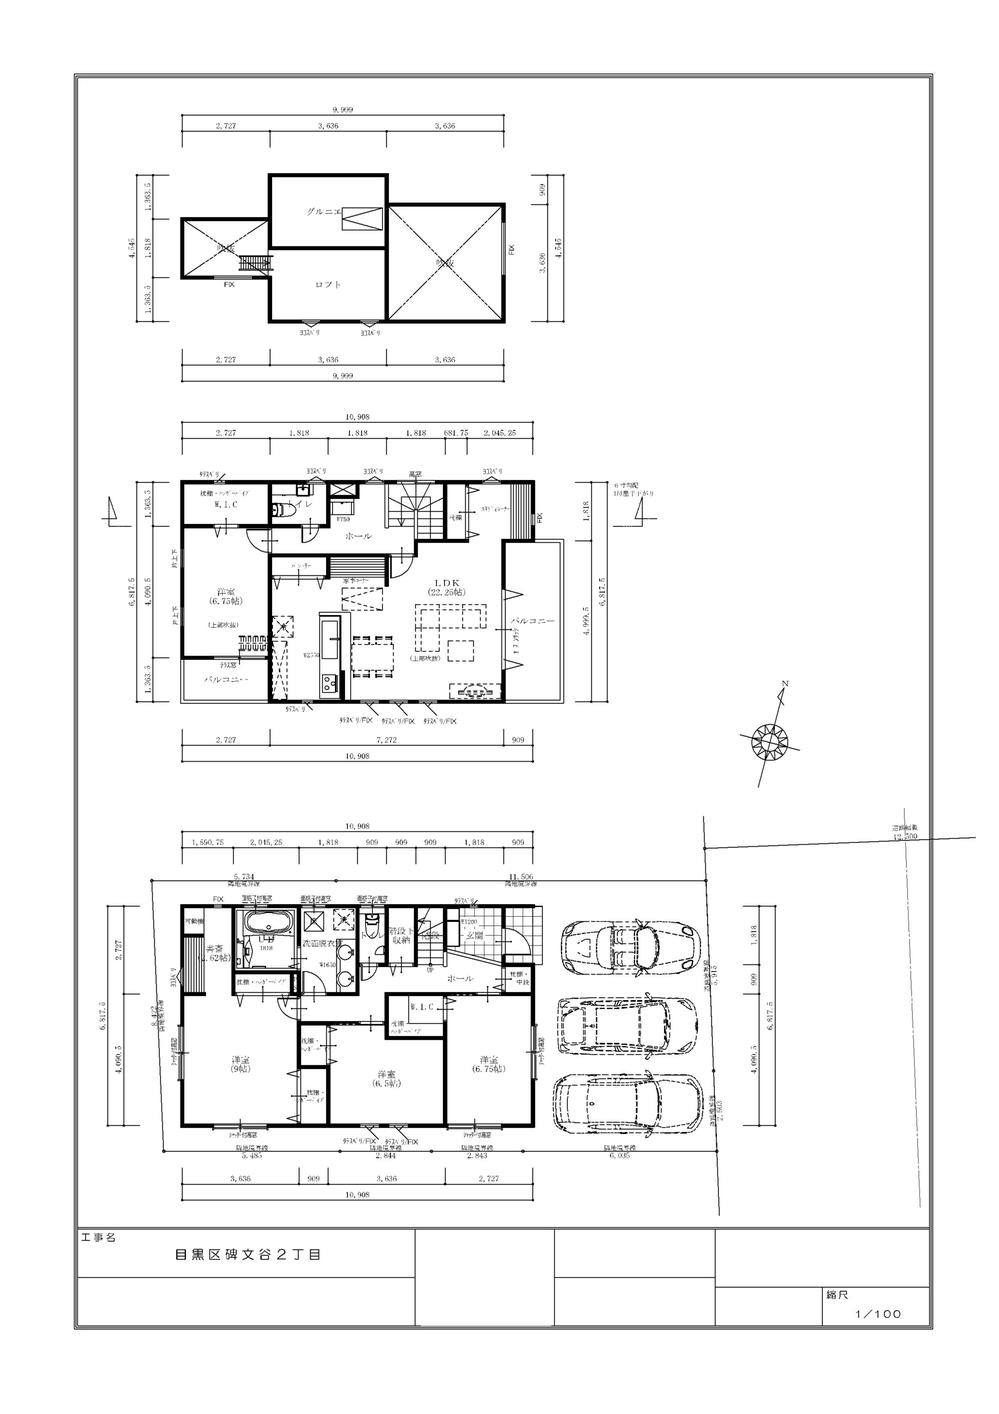 Building plan example (floor plan). Building plan example ( Issue land) Building Price About 25 million yen, Building area About 138.81 sq m